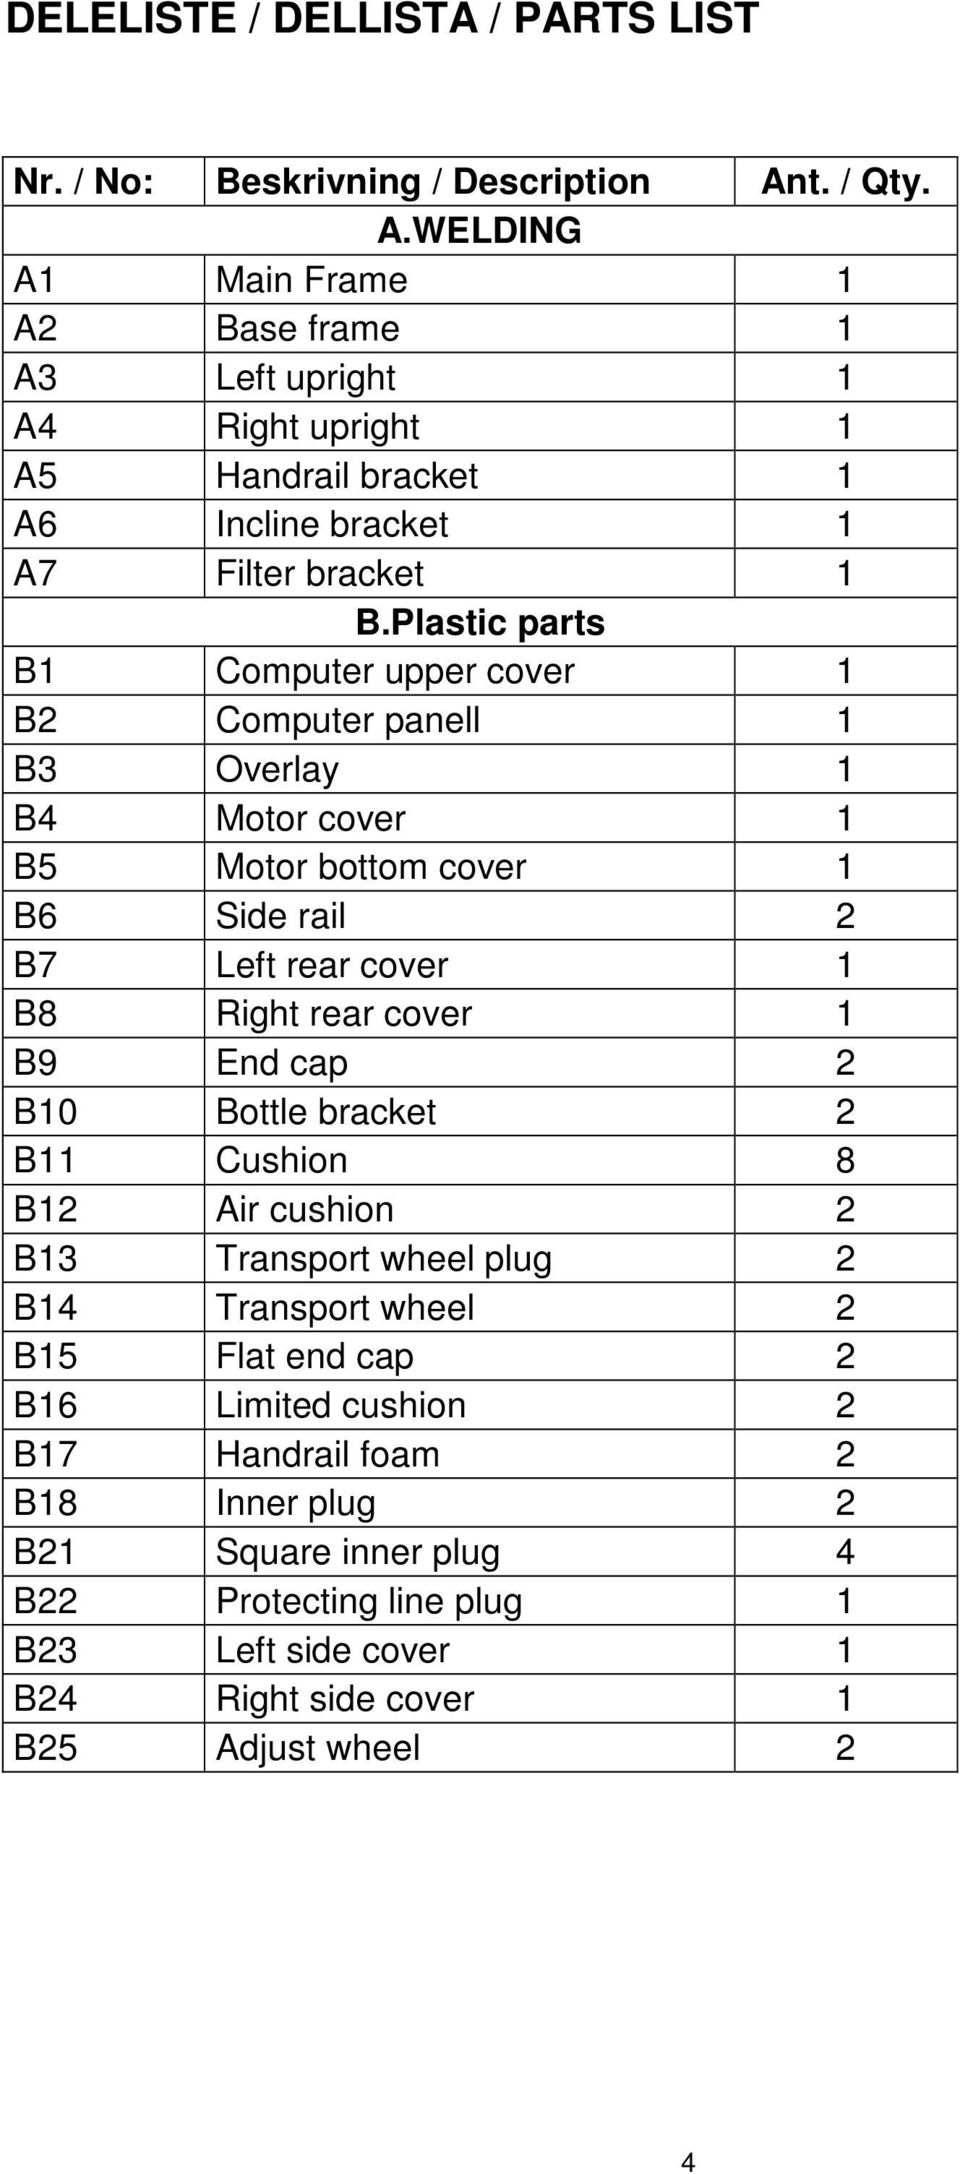 Plastic parts B1 Computer upper cover 1 B2 Computer panell 1 B3 Overlay 1 B4 Motor cover 1 B5 Motor bottom cover 1 B6 Side rail 2 B7 Left rear cover 1 B8 Right rear cover 1 B9